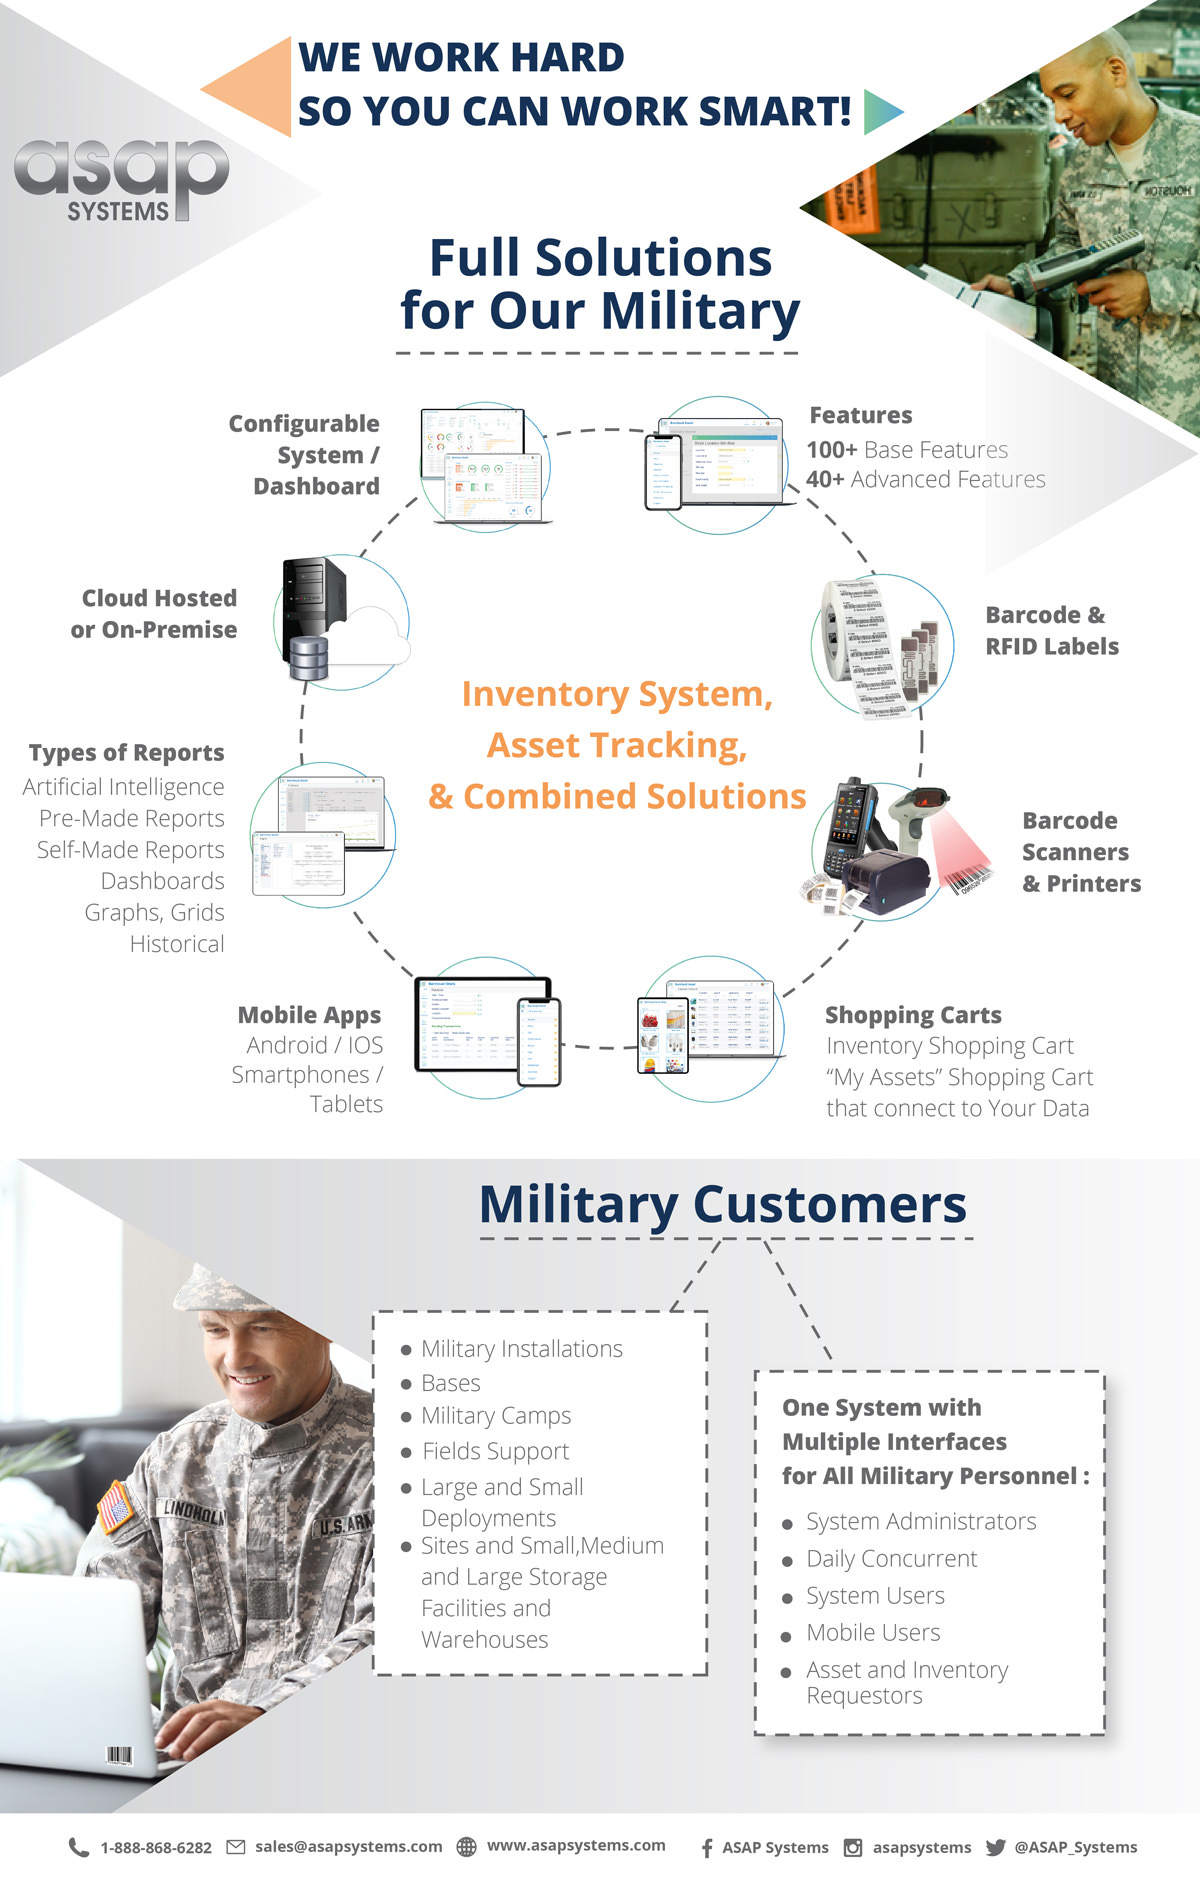 Inventory System Asset Tracking Full Solution for Military Brochure